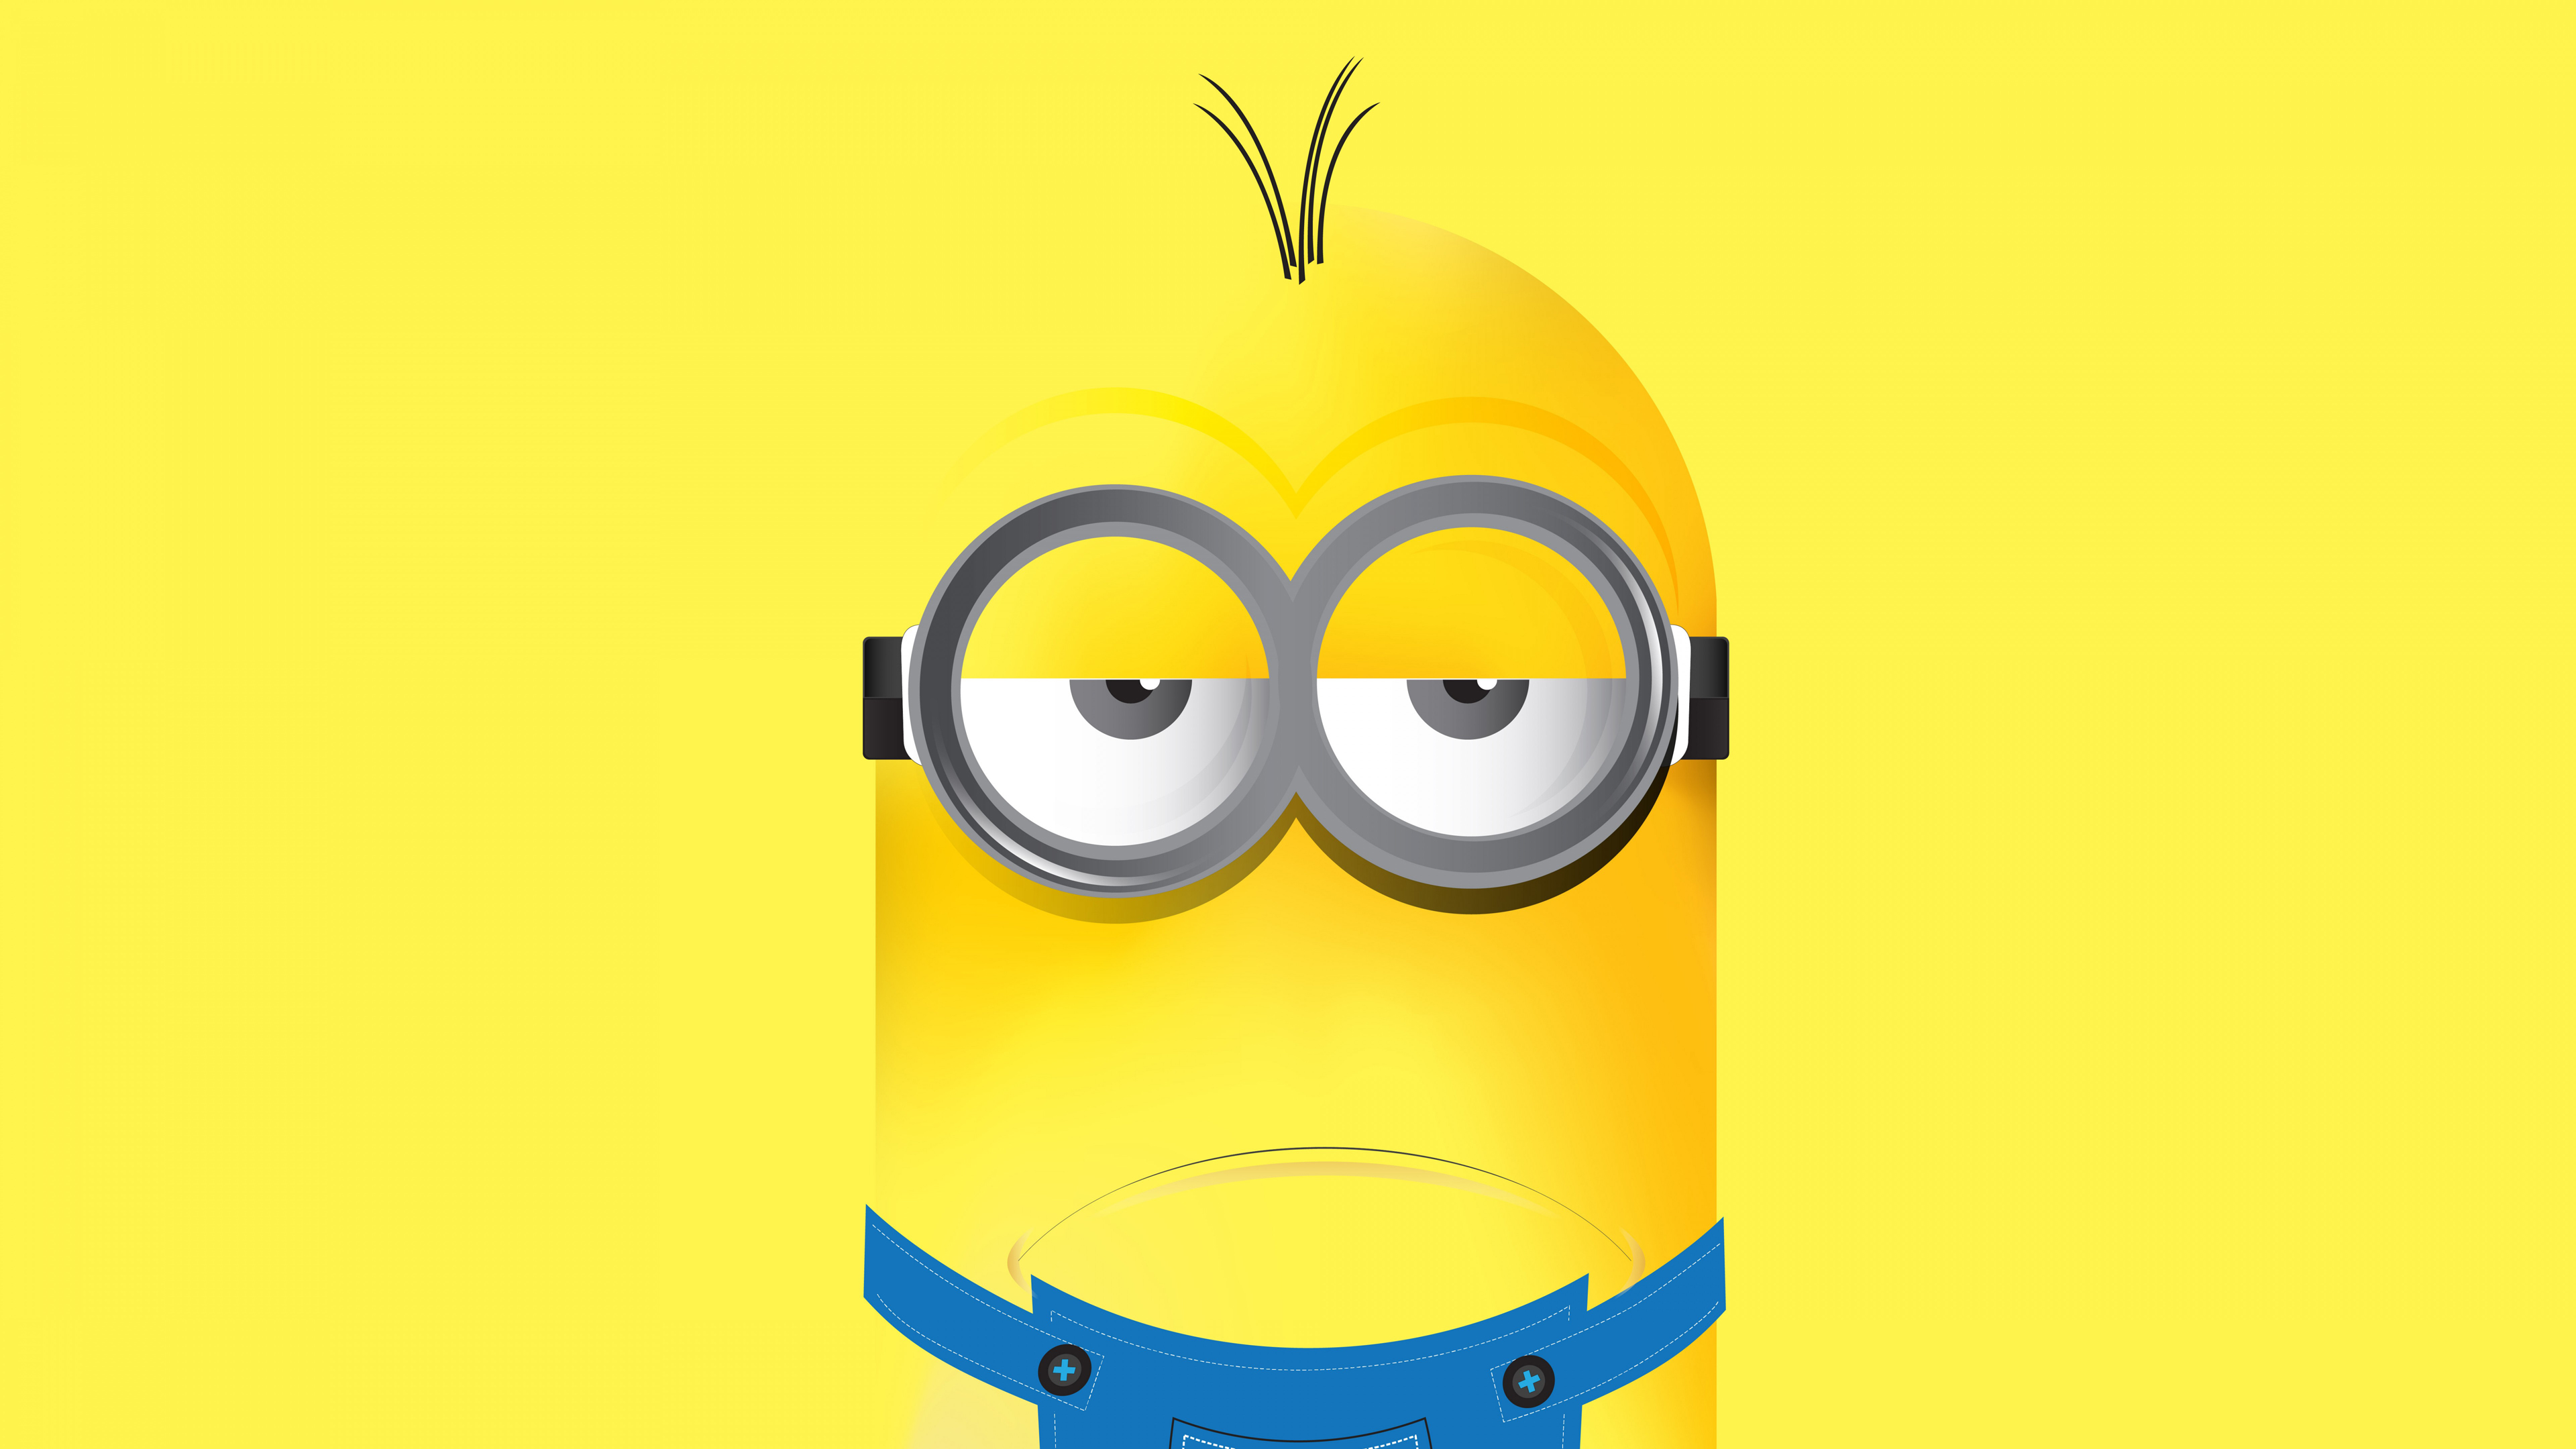 General 3840x2160 simple background yellow background minimalism goggles minions movie characters